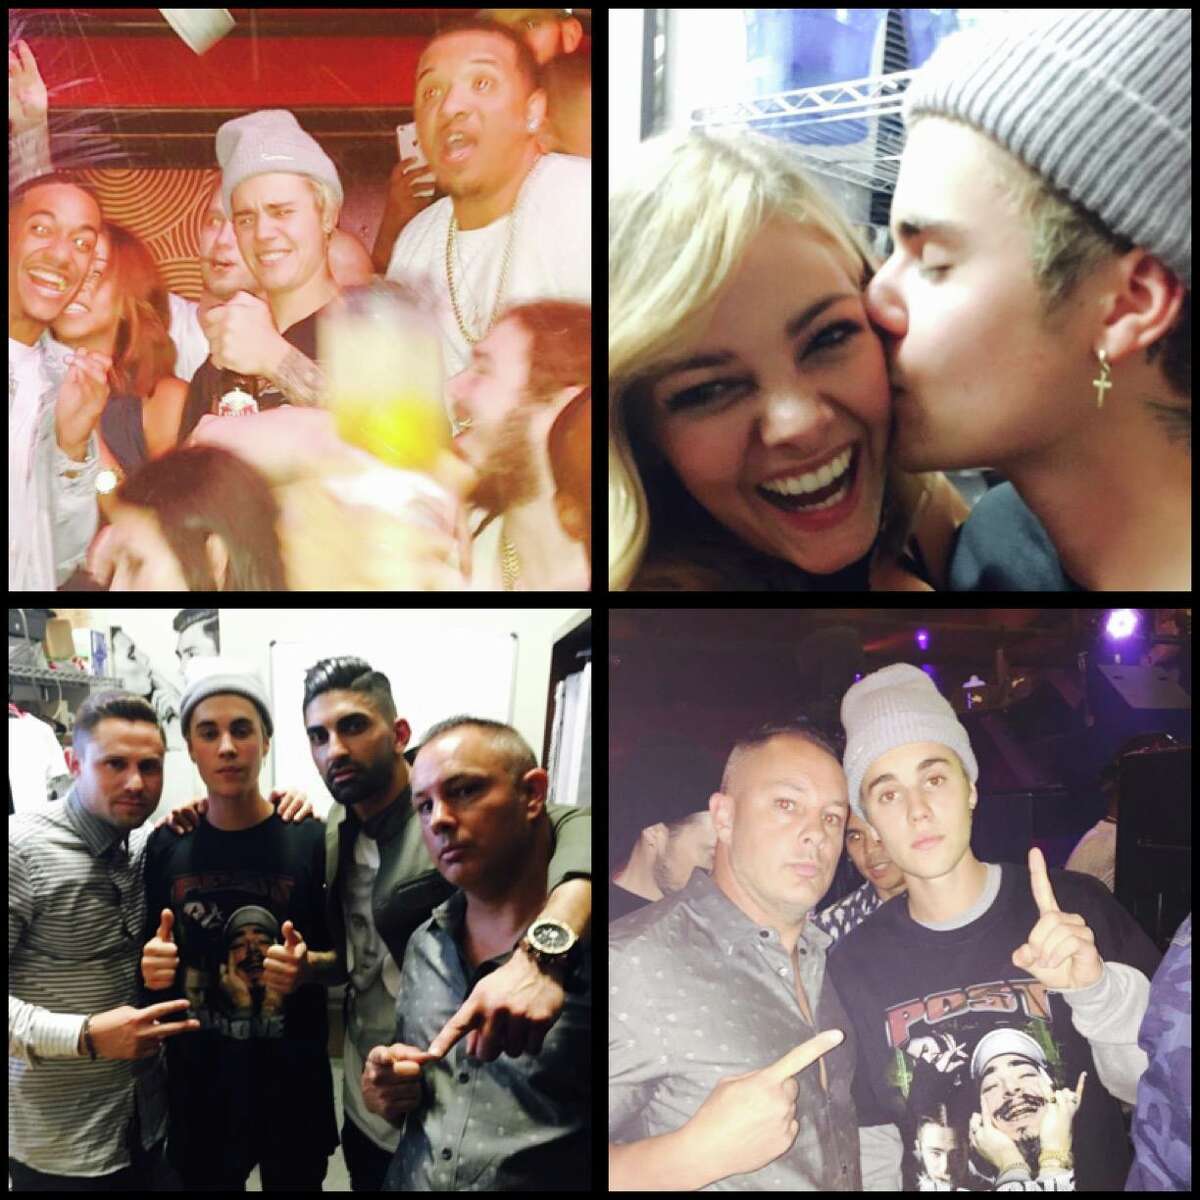 Justin Bieber partied at Cle on Main after his Saturday show.